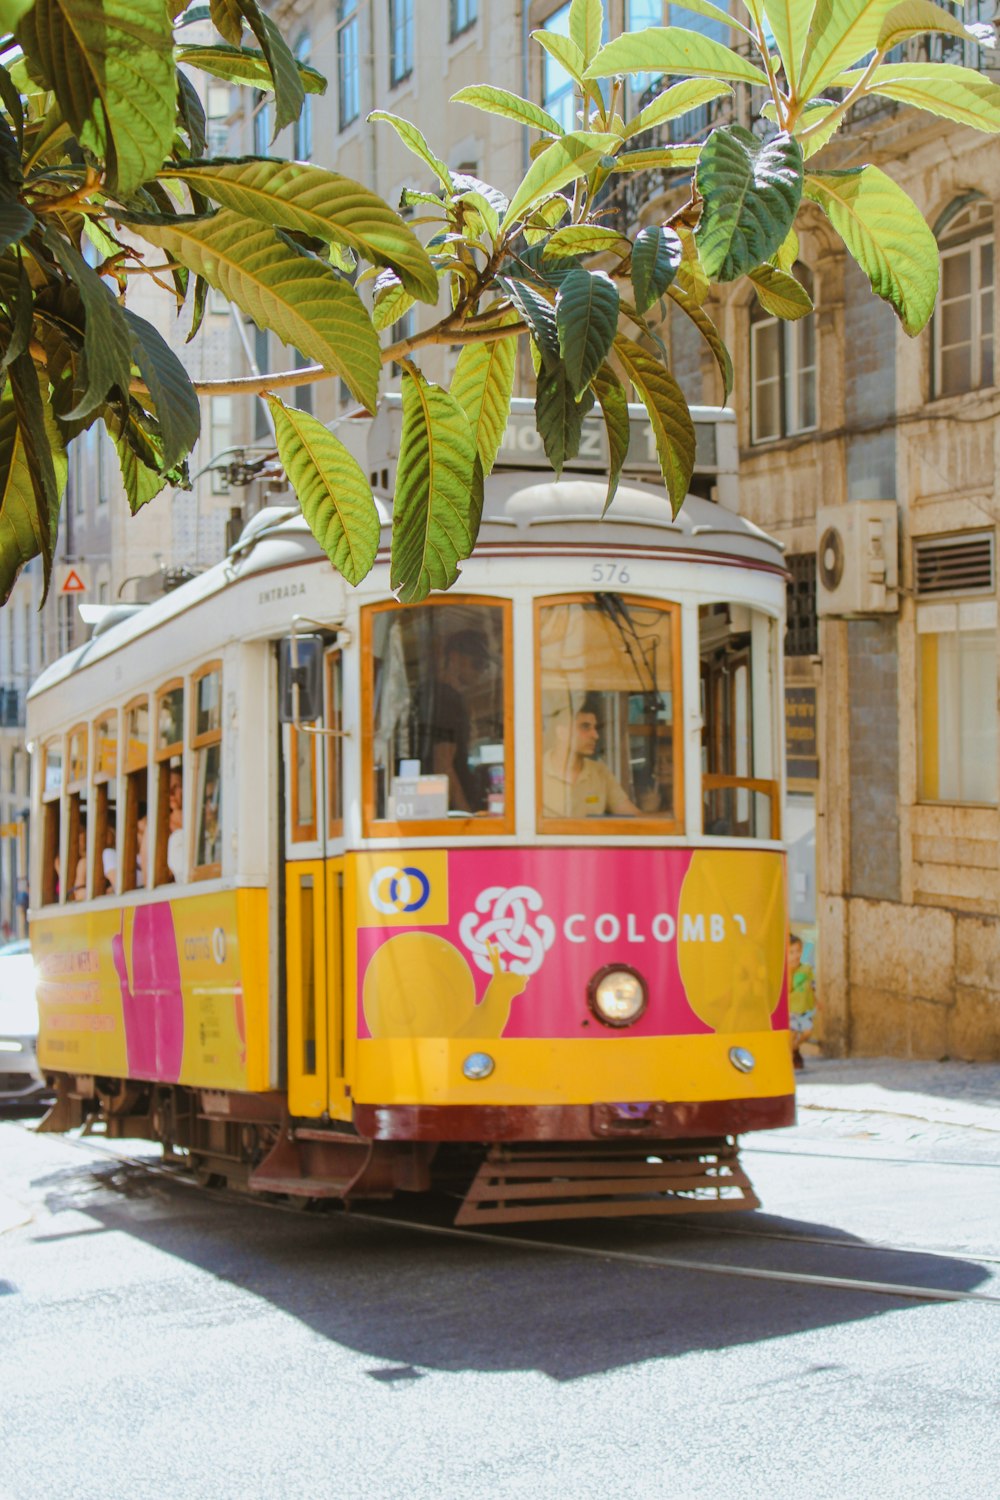 a yellow and pink trolley car on a city street